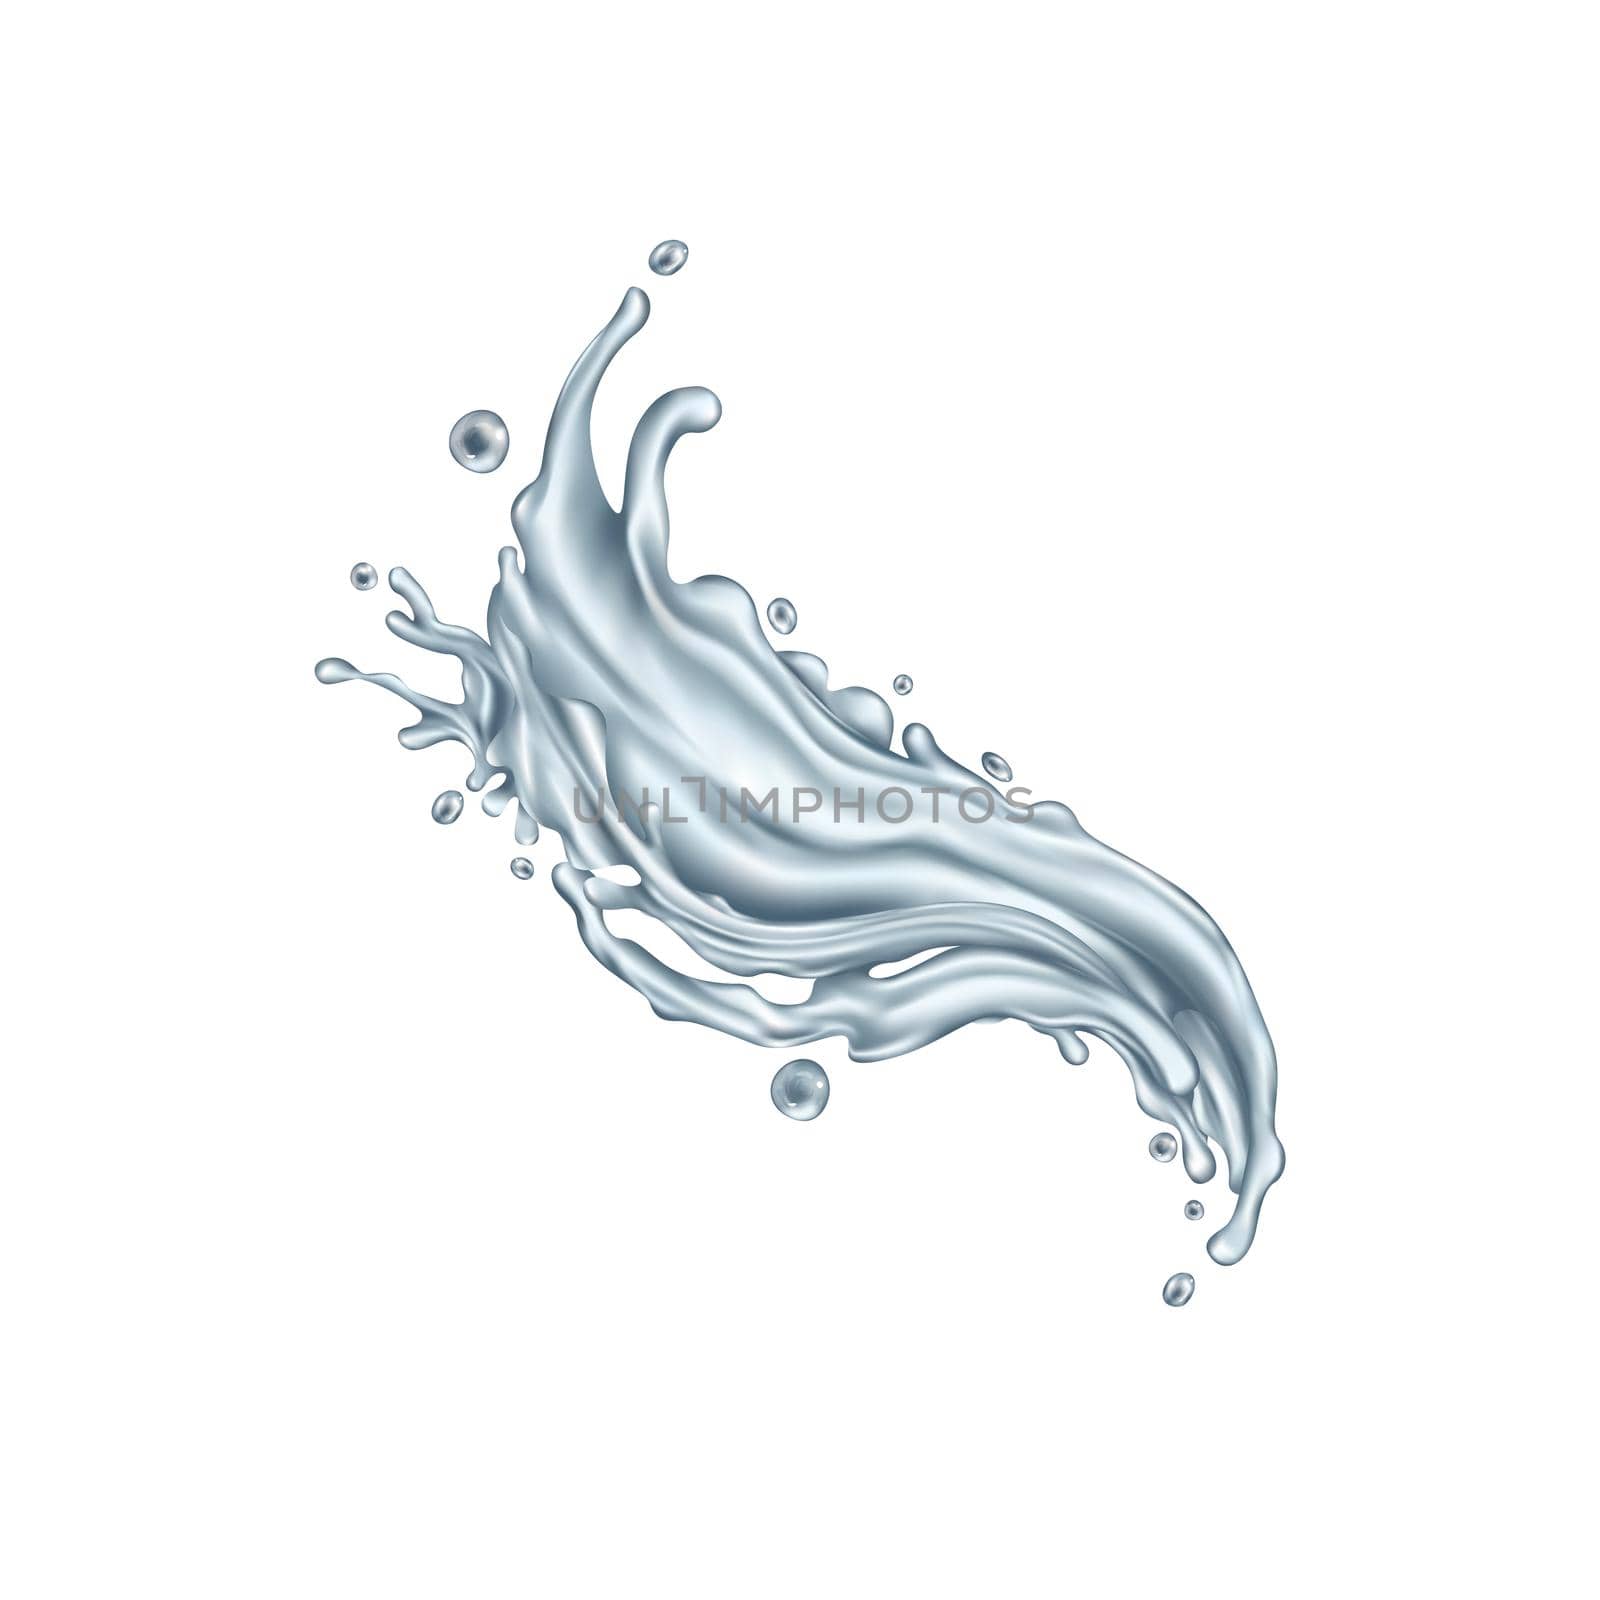 Clear water splash on a white background by ConceptCafe